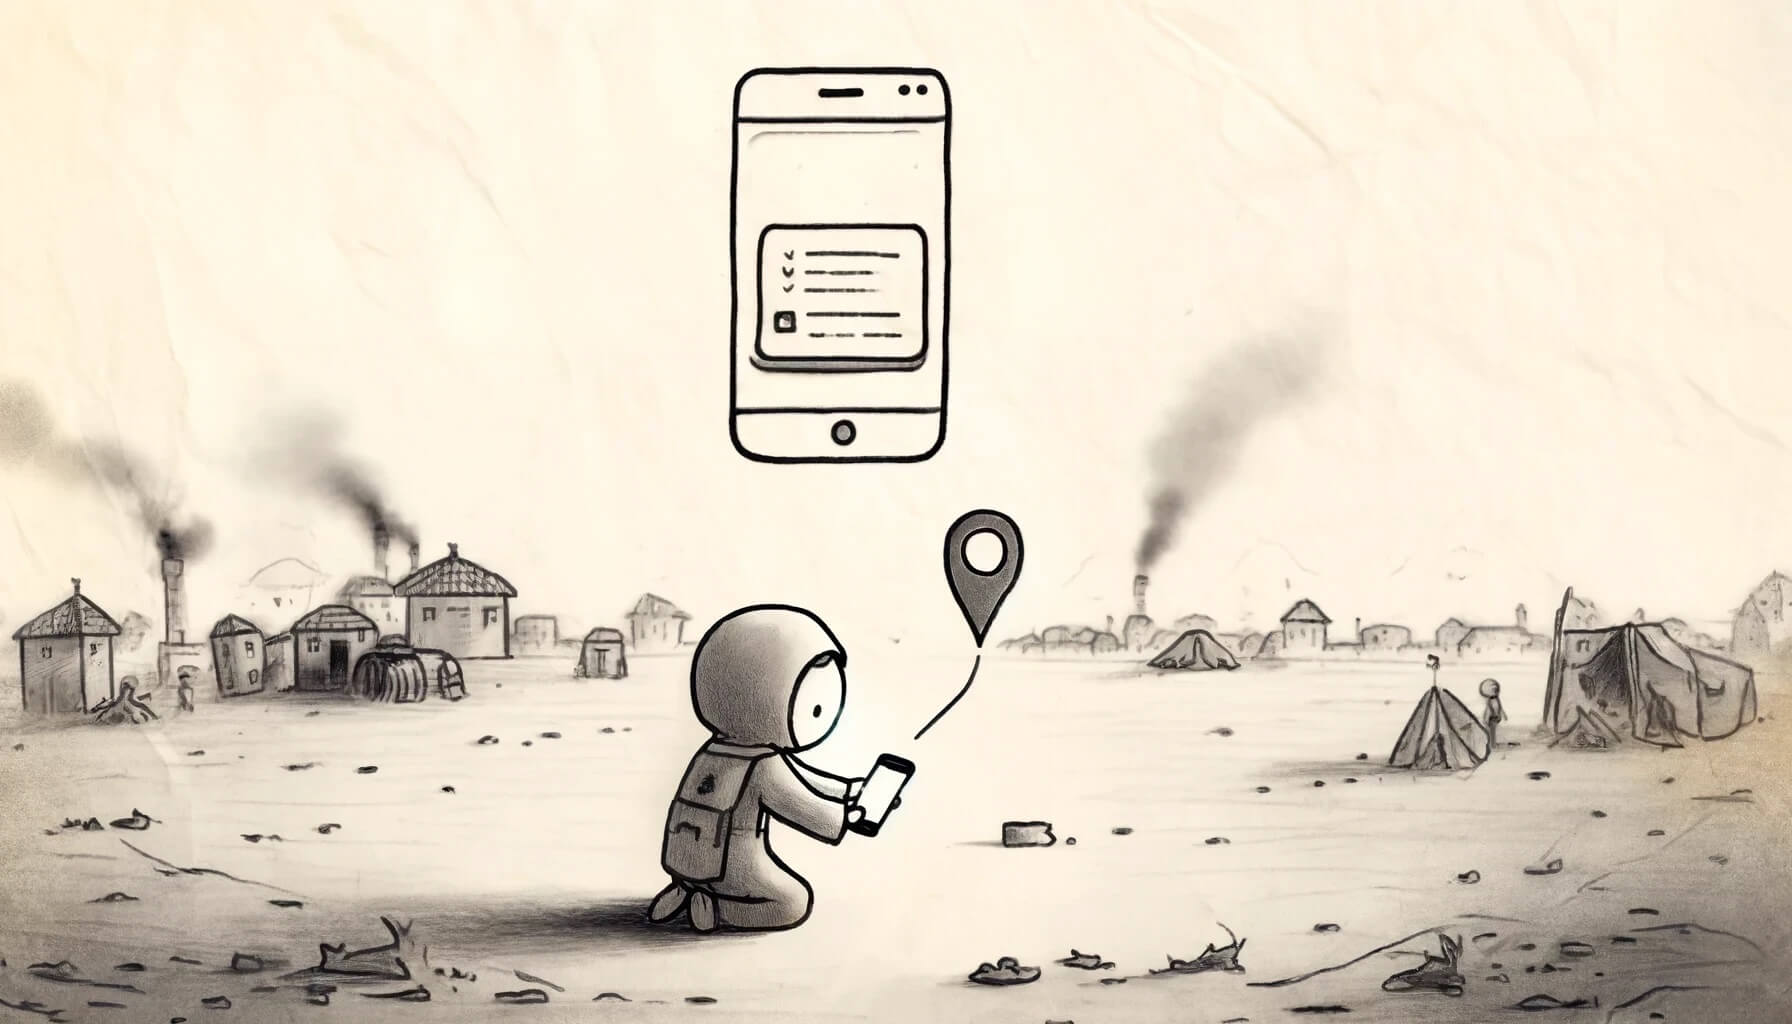 Hand-drawn like illustration depicts a person (child) wearing a hooded jacket, kneeling in a desolate, conflict-affected area. The individual is looking at a smartphone. Above the person, a large smartphone screen displays a form or list interface, and a location pin icon is shown to the right, connected by a dotted line. In the background, there are damaged buildings and tents, with smoke rising from some structures, indicating the aftermath of conflict. The image represents the process of submitting and verifying geolocation proofs on the Mina blockchain using zkLocus, ensuring data is authenticated, integrity-assured, and transparent.